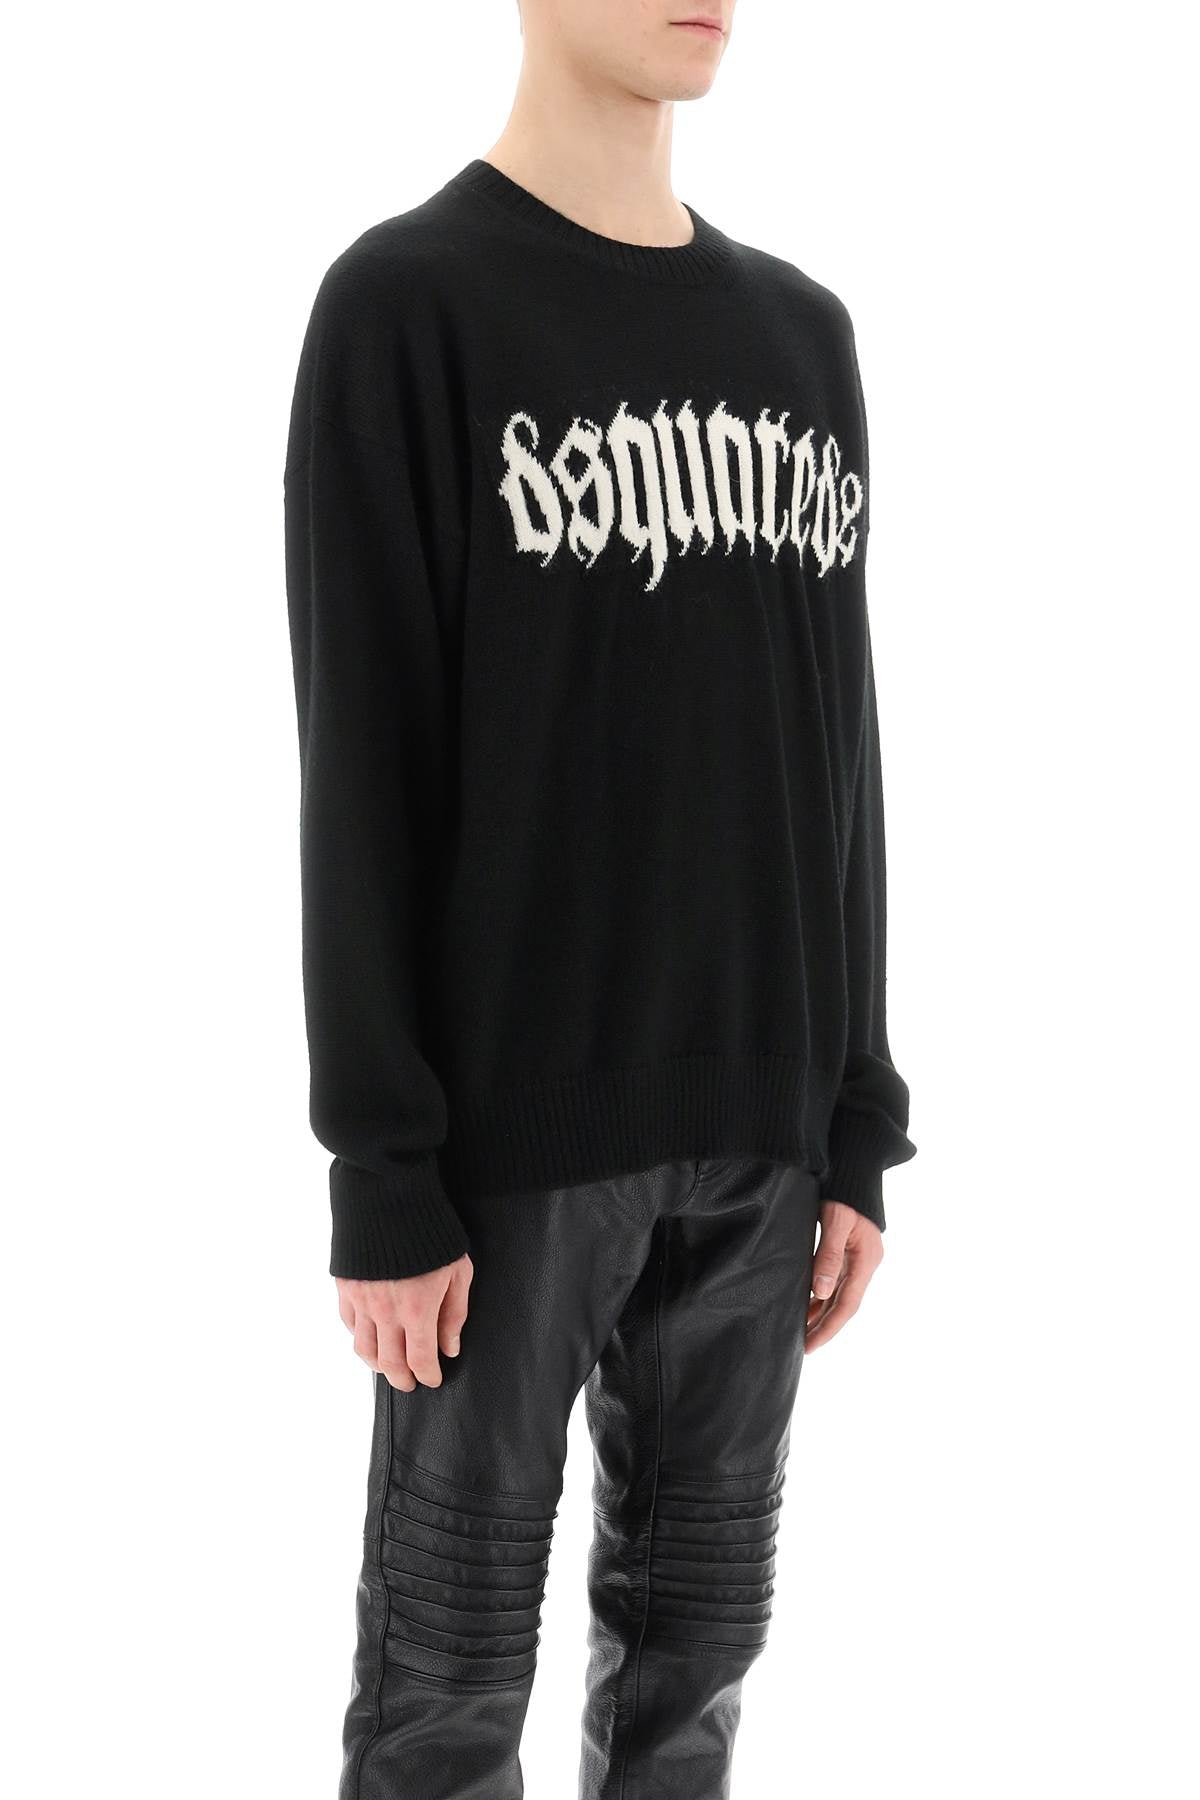 Dsquared2 Dsquared2 gothic logo sweater